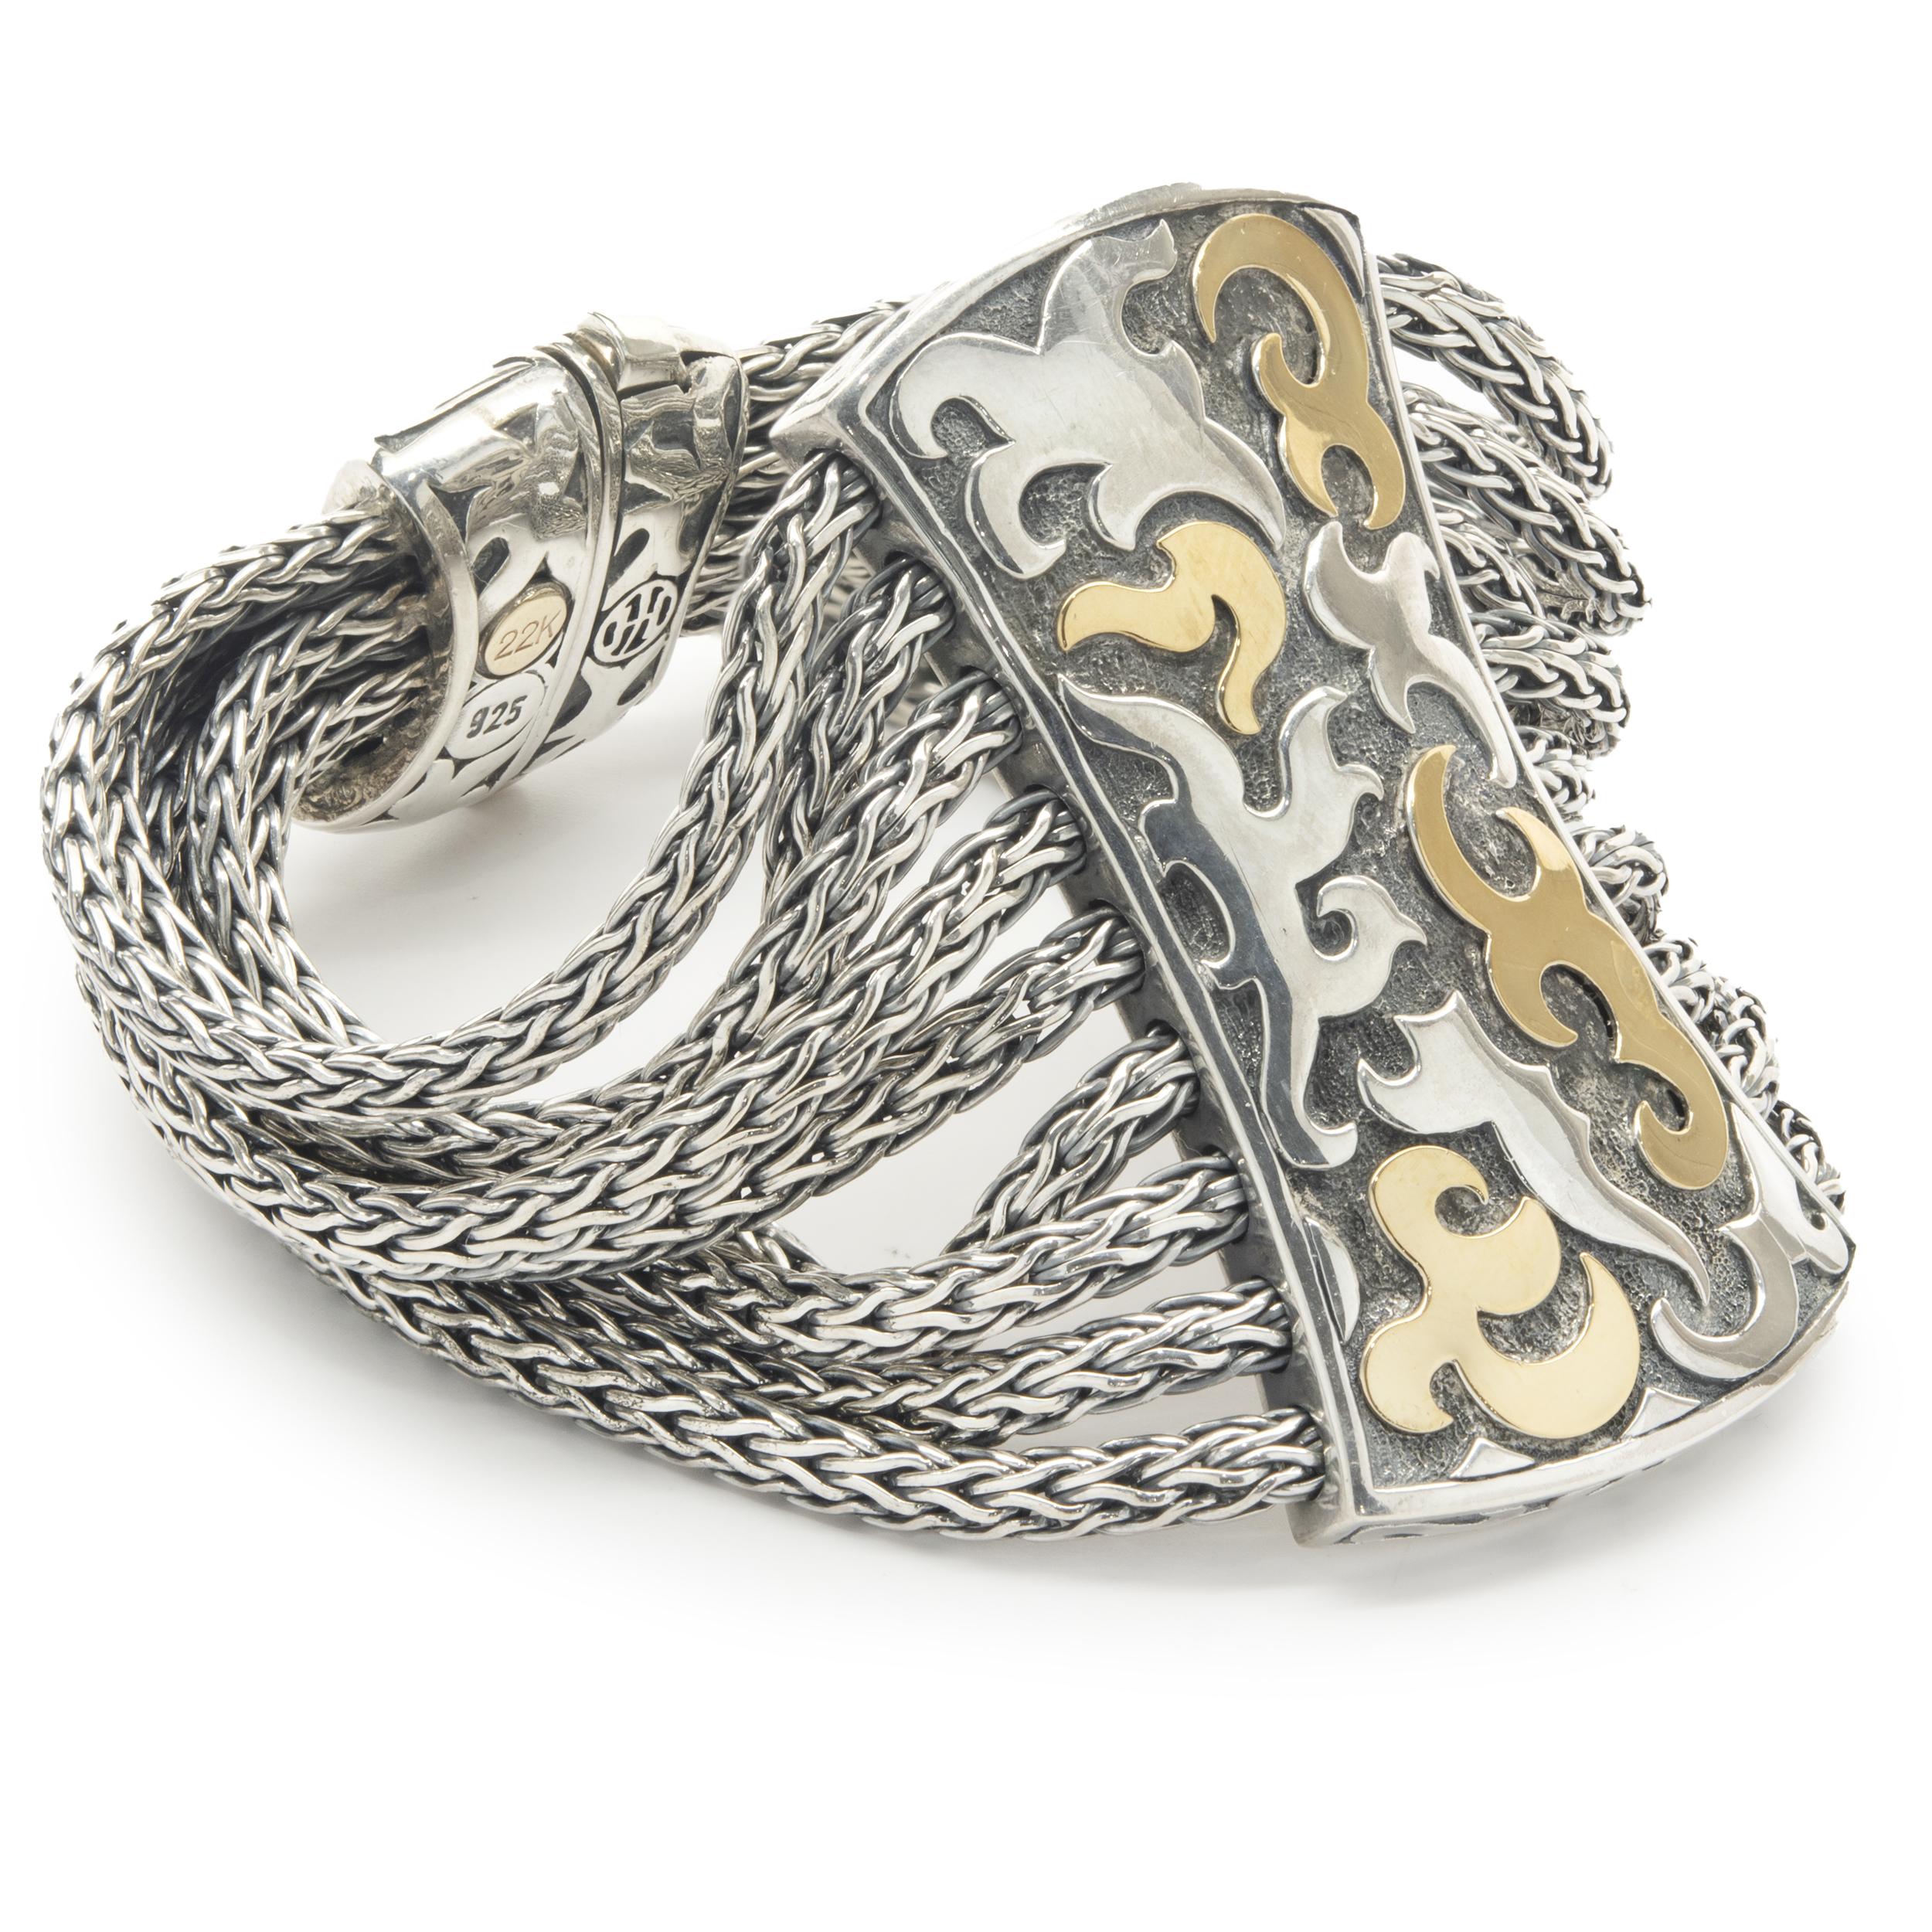 Designer: John Hardy
Material: Sterling Silver / 18K yellow gold
Dimensions: bracelet measures 7.5-inches in length
Weight: 107.71 grams
